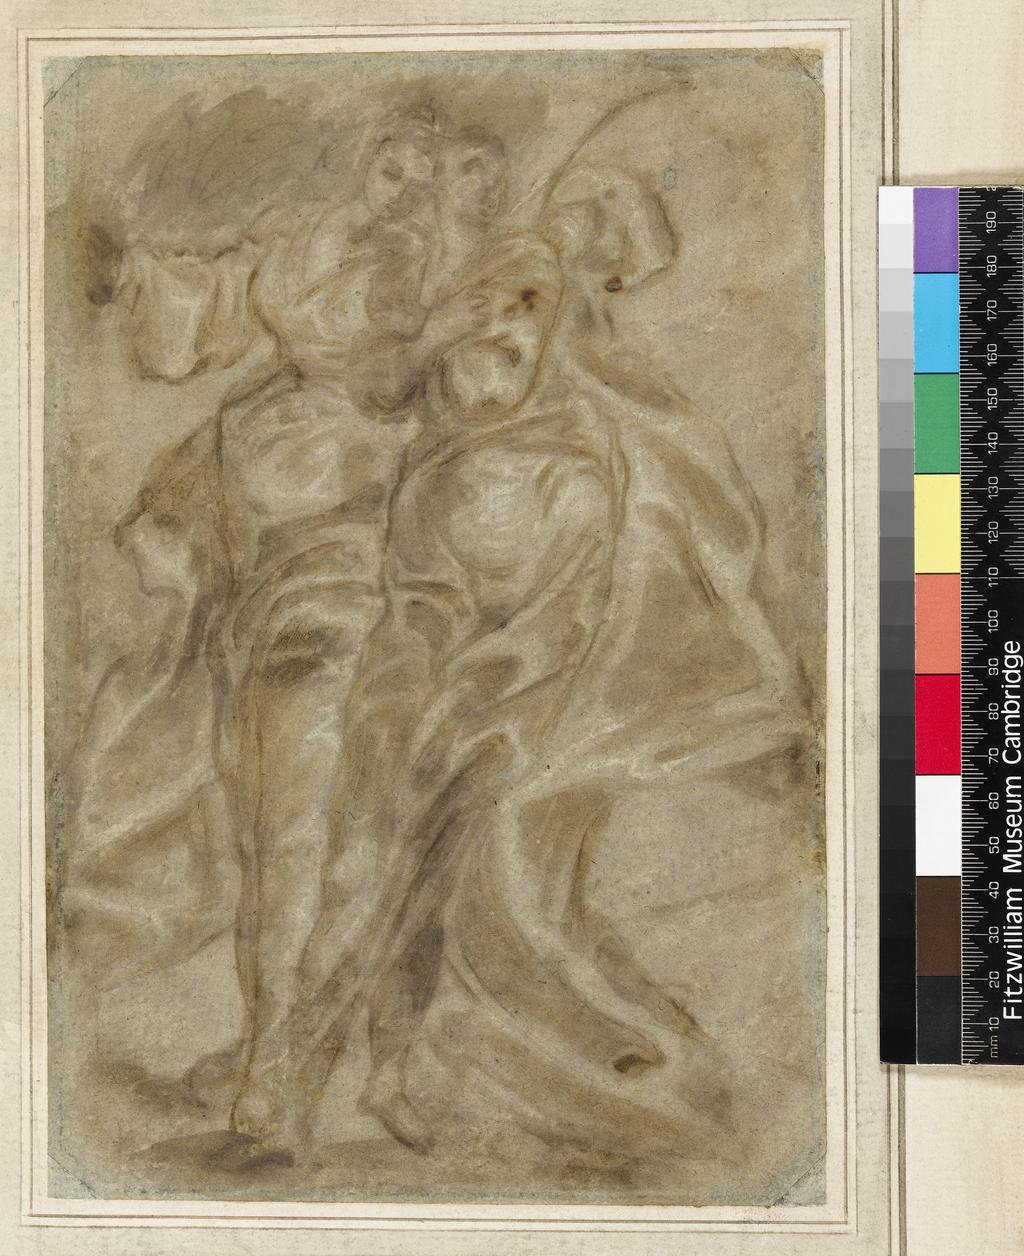 An image of Title/s: A study of two draped female figures Maker/s: THEOTOKOPOULOS, Domenico, called EL GRECO, attributed to Candia [now Herakleion], Crete c.1541-1614 ToledoTechnique Description: brush in brown and grey, heightened with bodycolour on faded blue-grey paper Dimensions: height: 260 mm, width: 176 mm